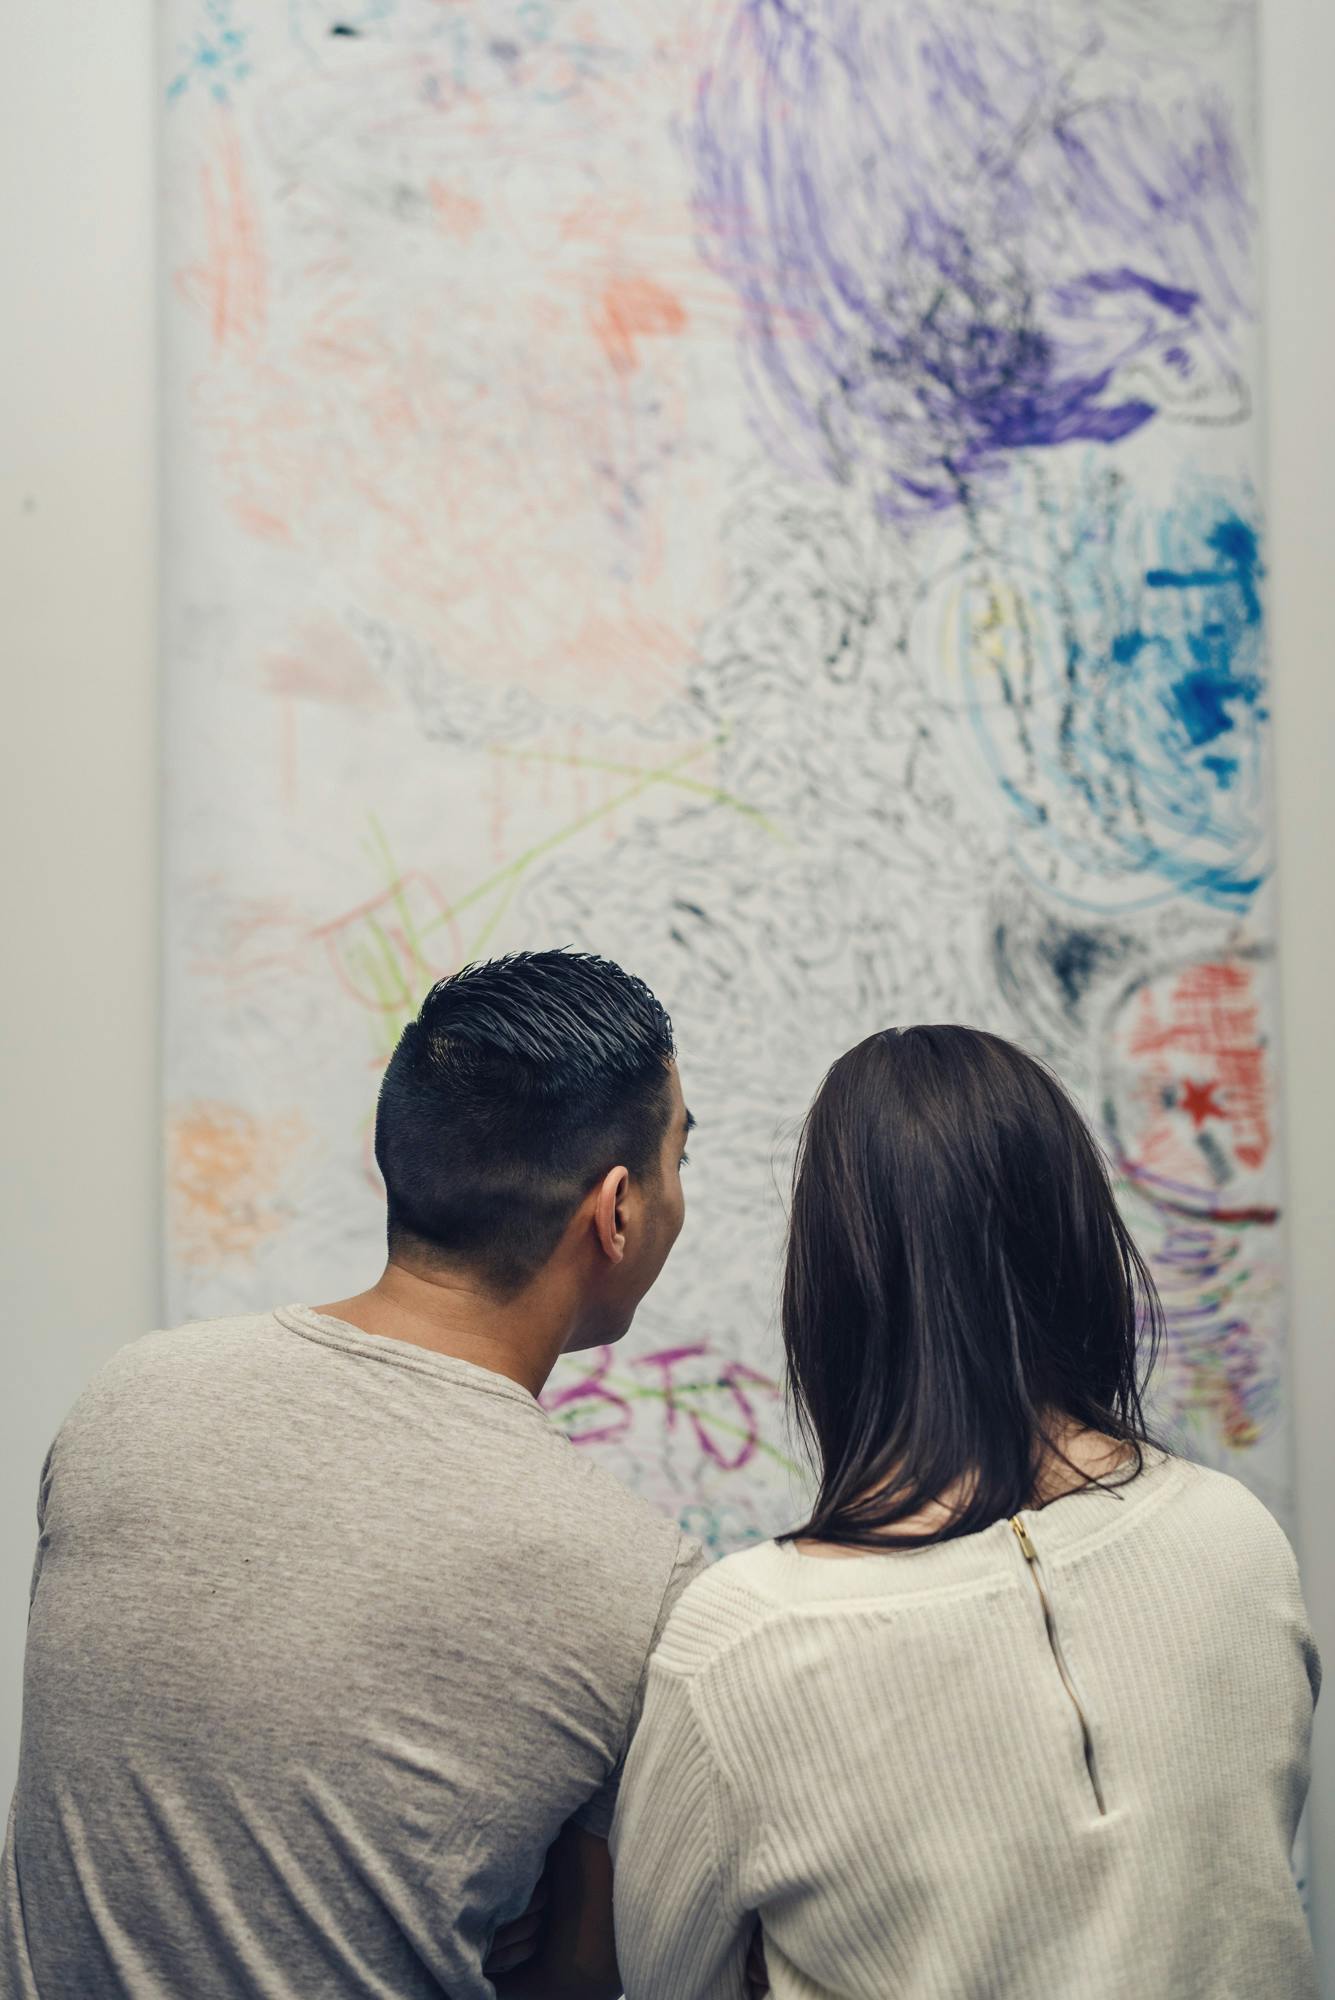 Two people, facing their back to us, look closely at a large drawing on paper, which is mounted vertically on a wall. The lines and abstract figures drawn with blue, purple, and orange markers.